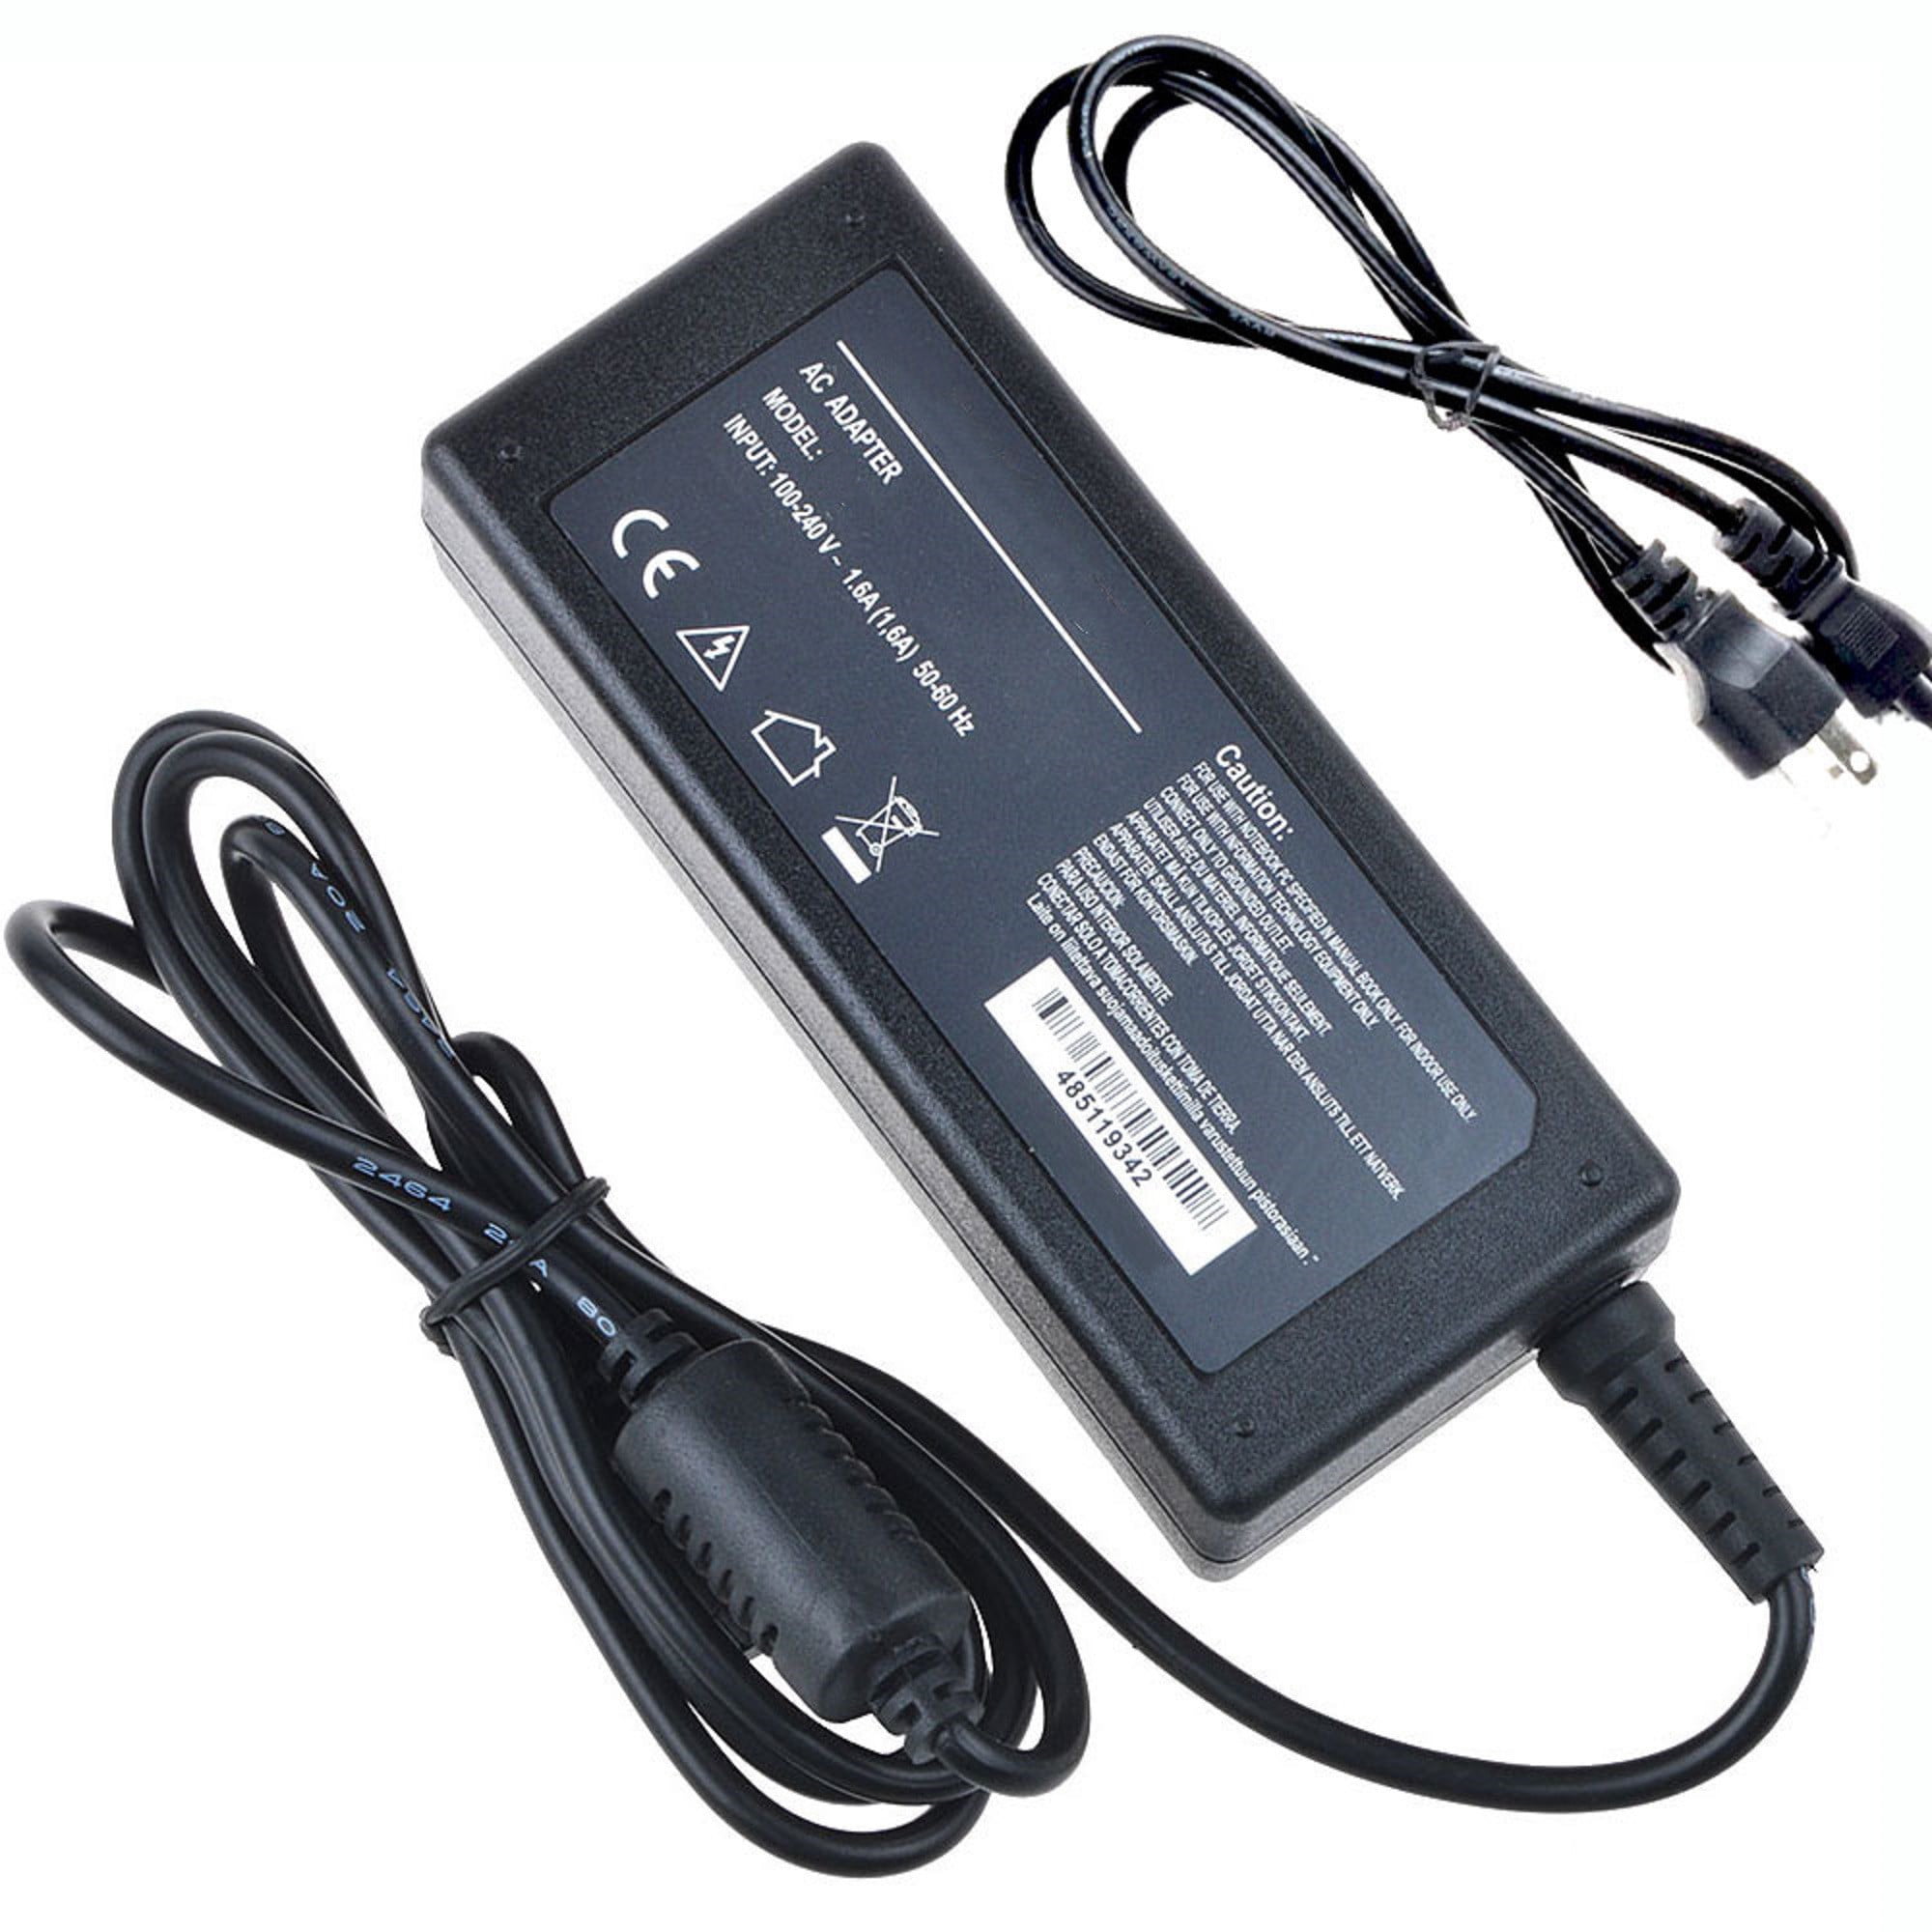 New Ac Adapter/Battery Charger/Power Supply For Nokia Booklet-2 3G 10.1" Netbook 